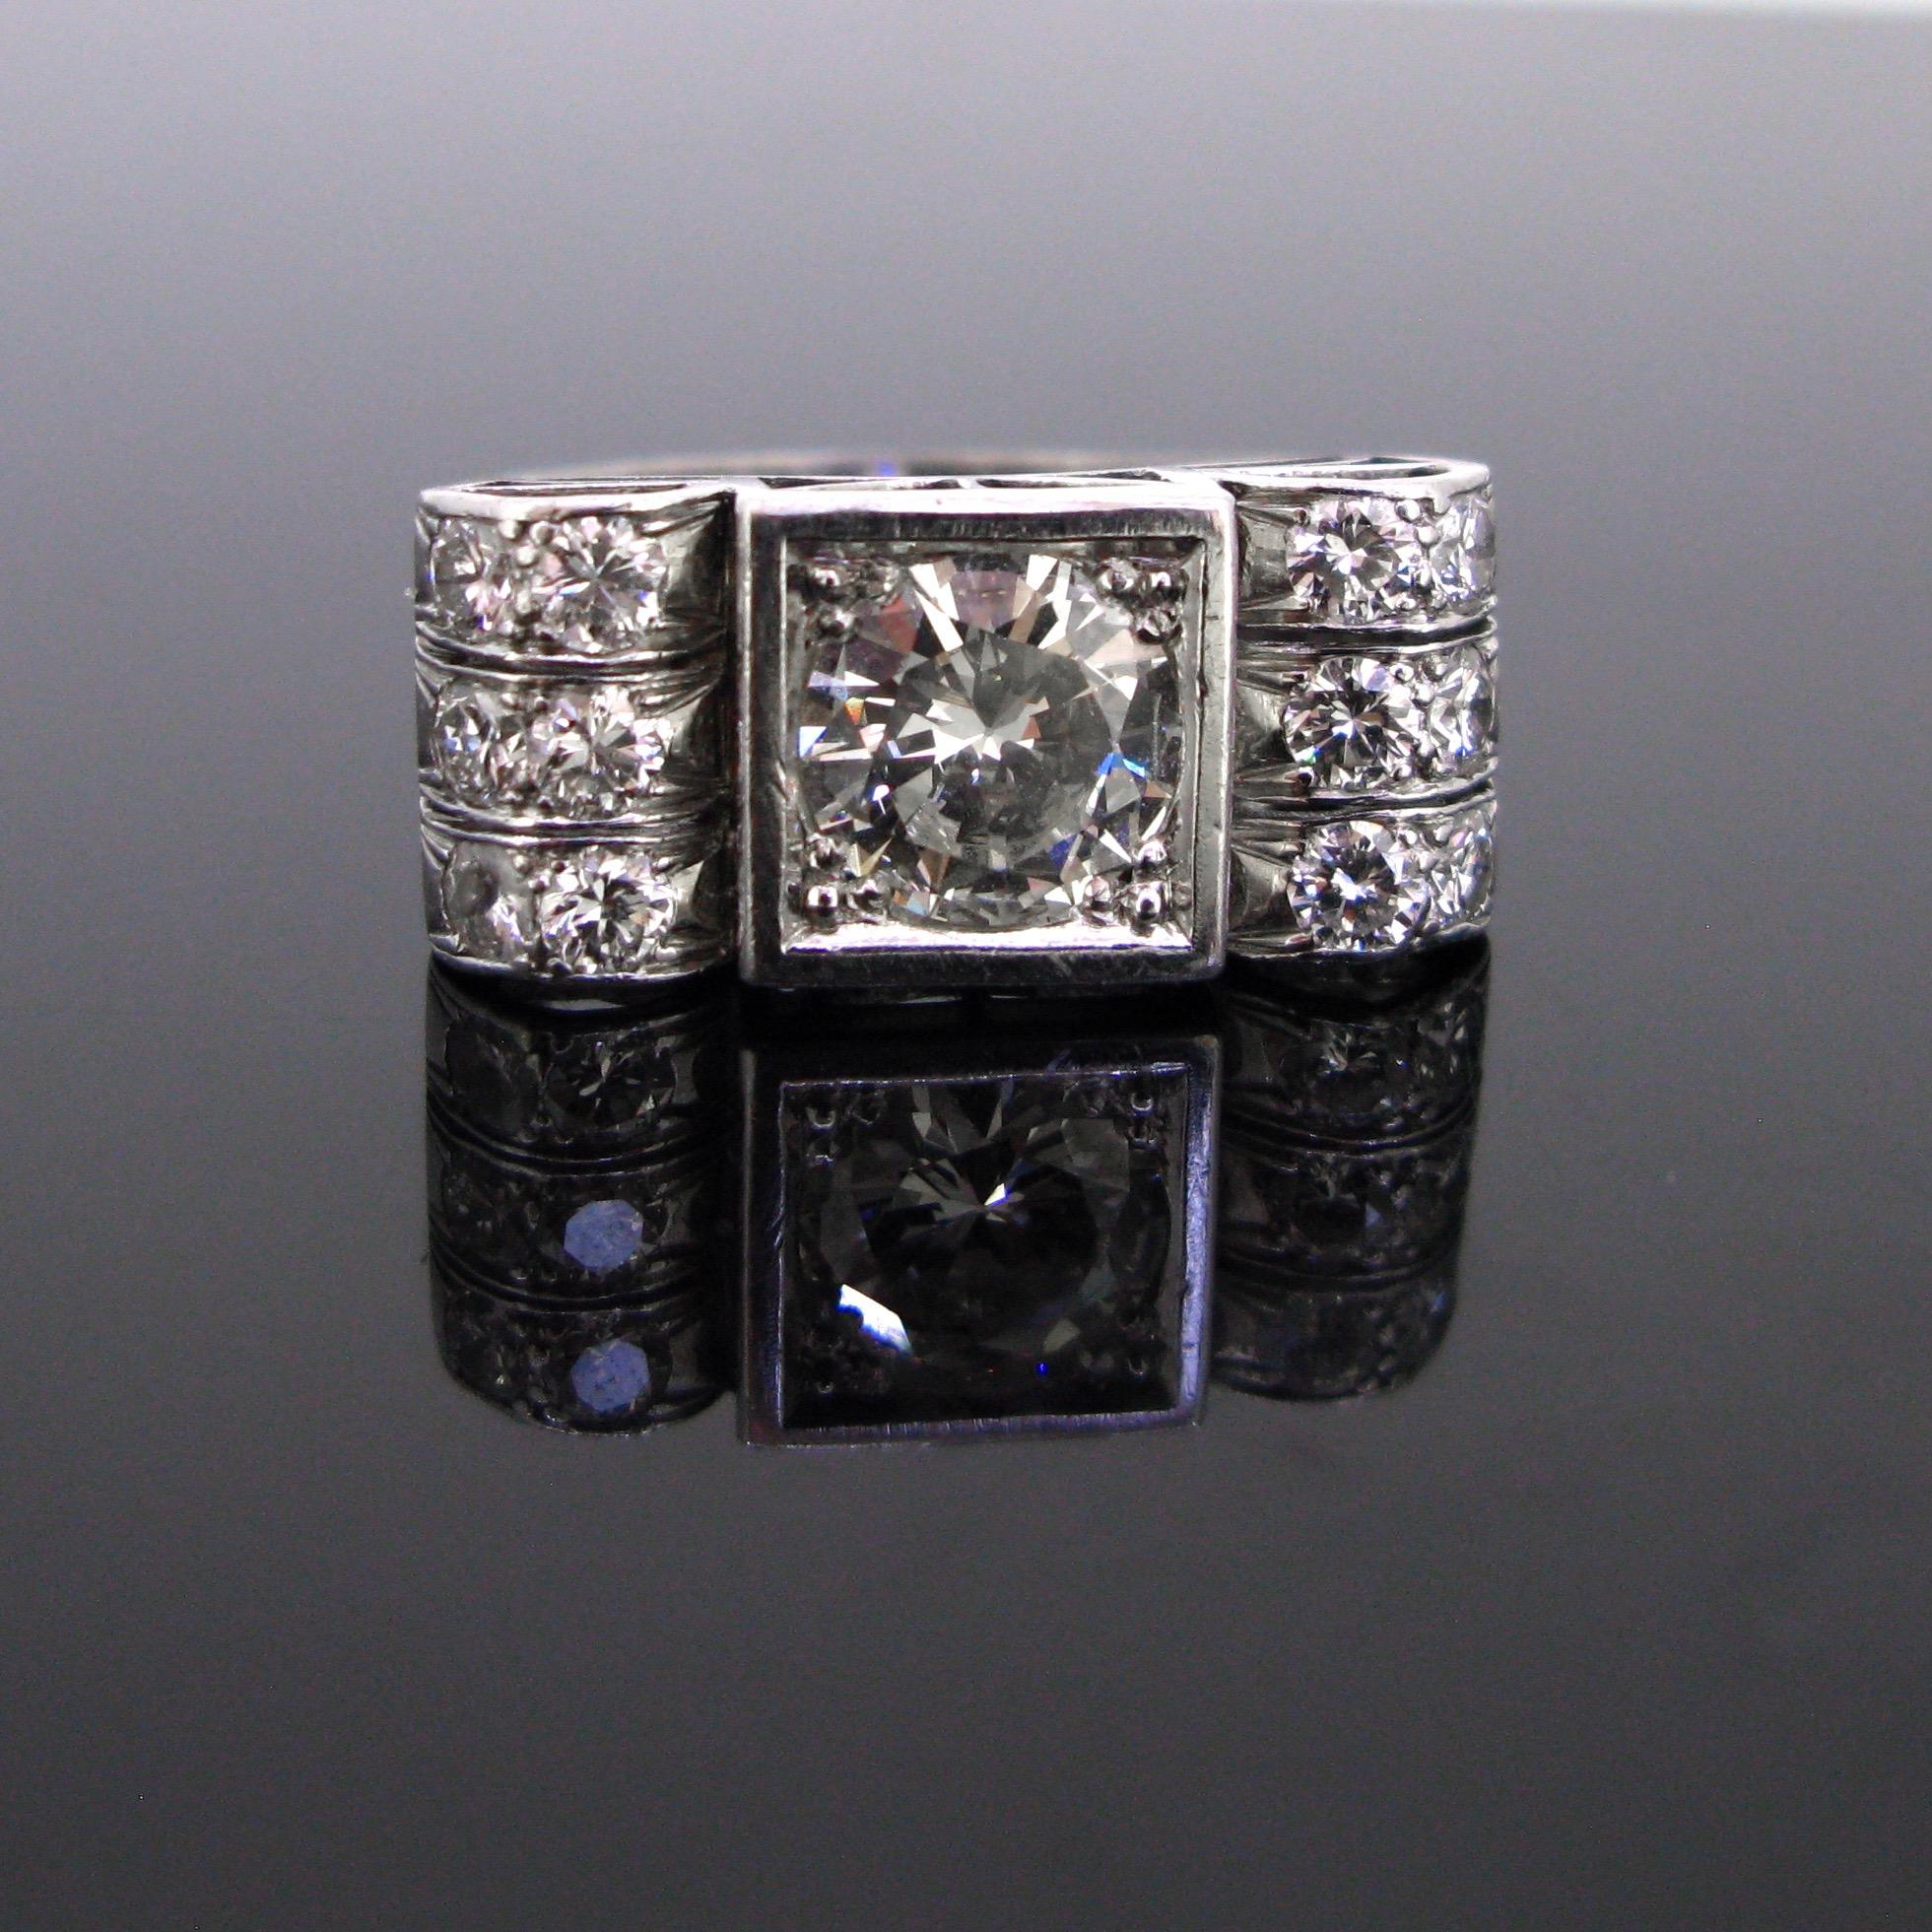 This ring comes directly from the Retro Era (circa 1940). These rings were mostly geometric, big and bold with a bombe or boule design. This one is a real testimony of the Retro period.  It is set with a vibrant brilliant cut diamond weighing